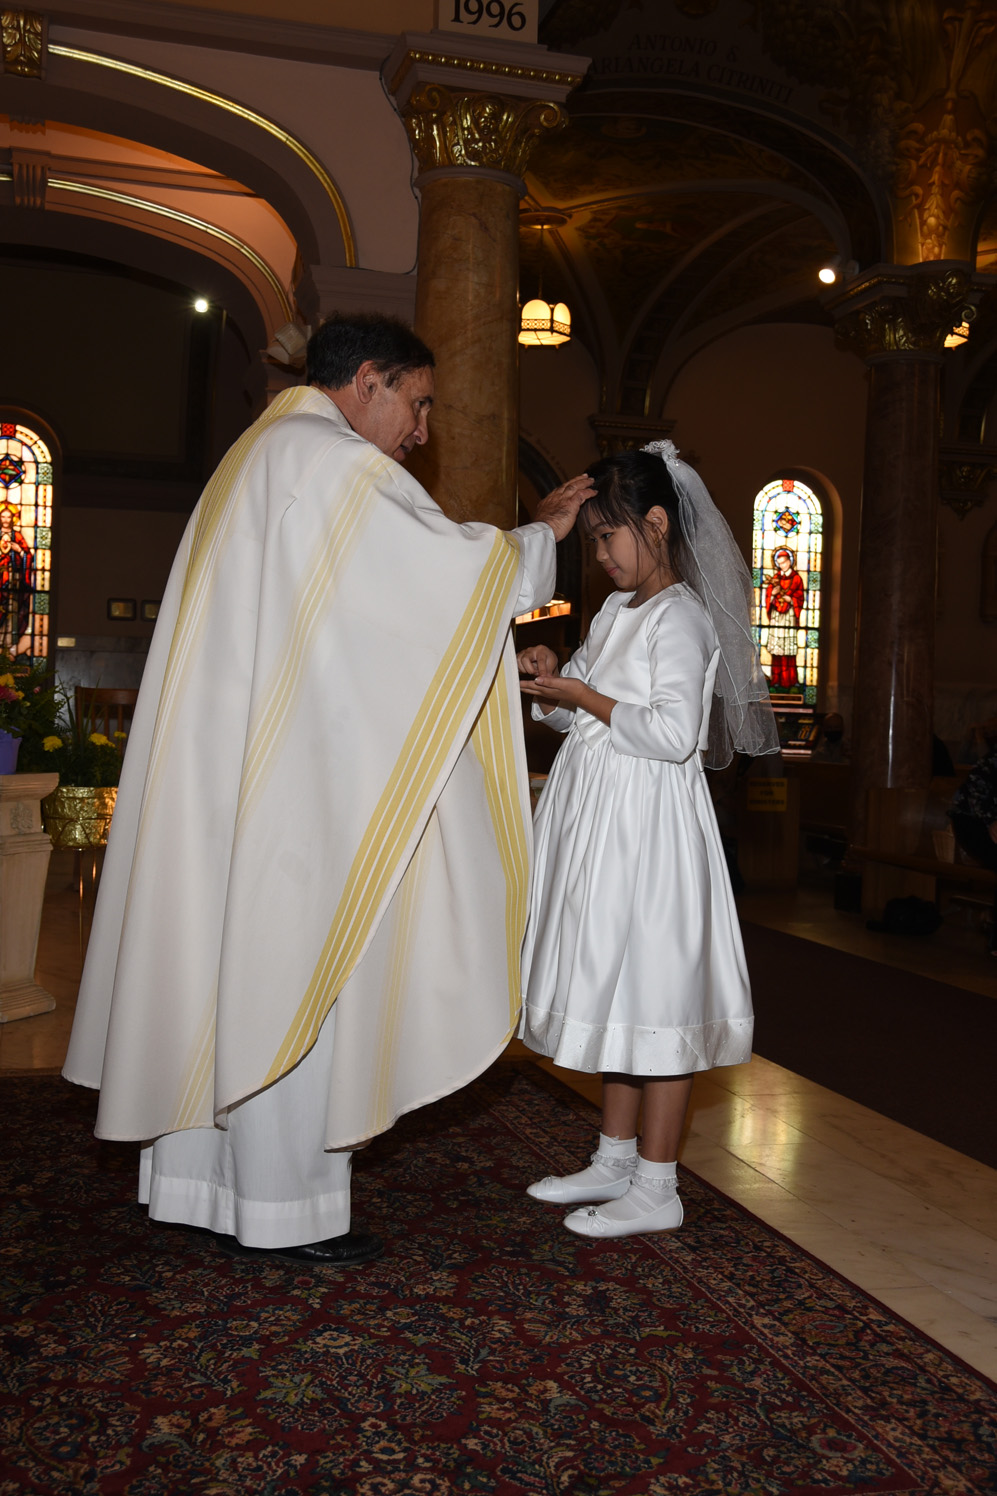 FIRST-COMMUNION-MAY-2-2021-1001001104